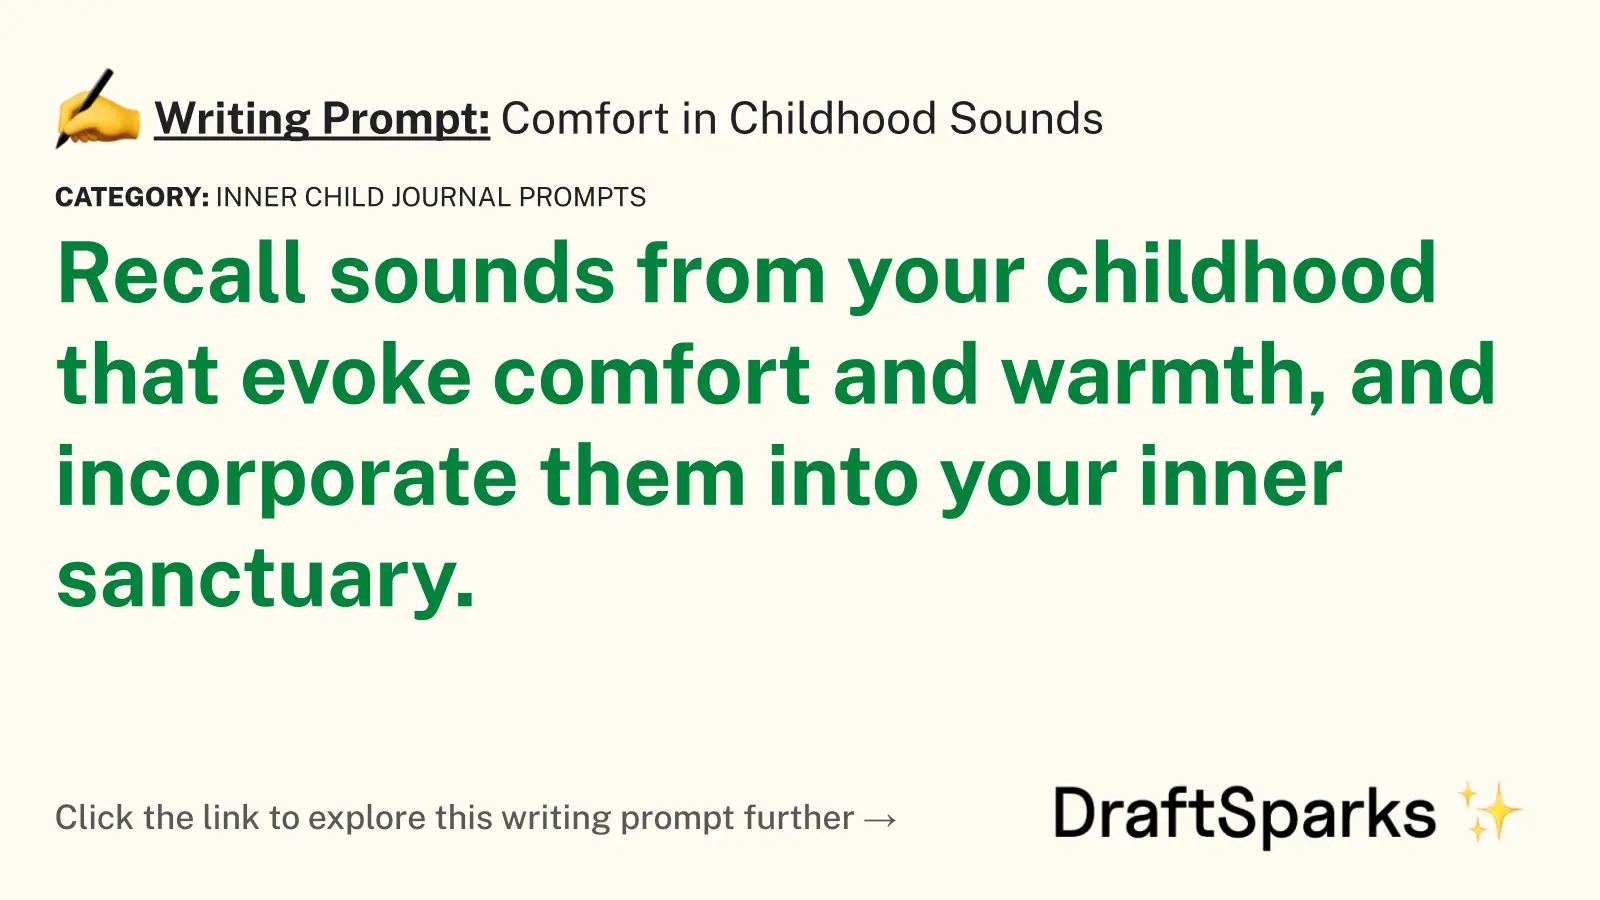 Comfort in Childhood Sounds